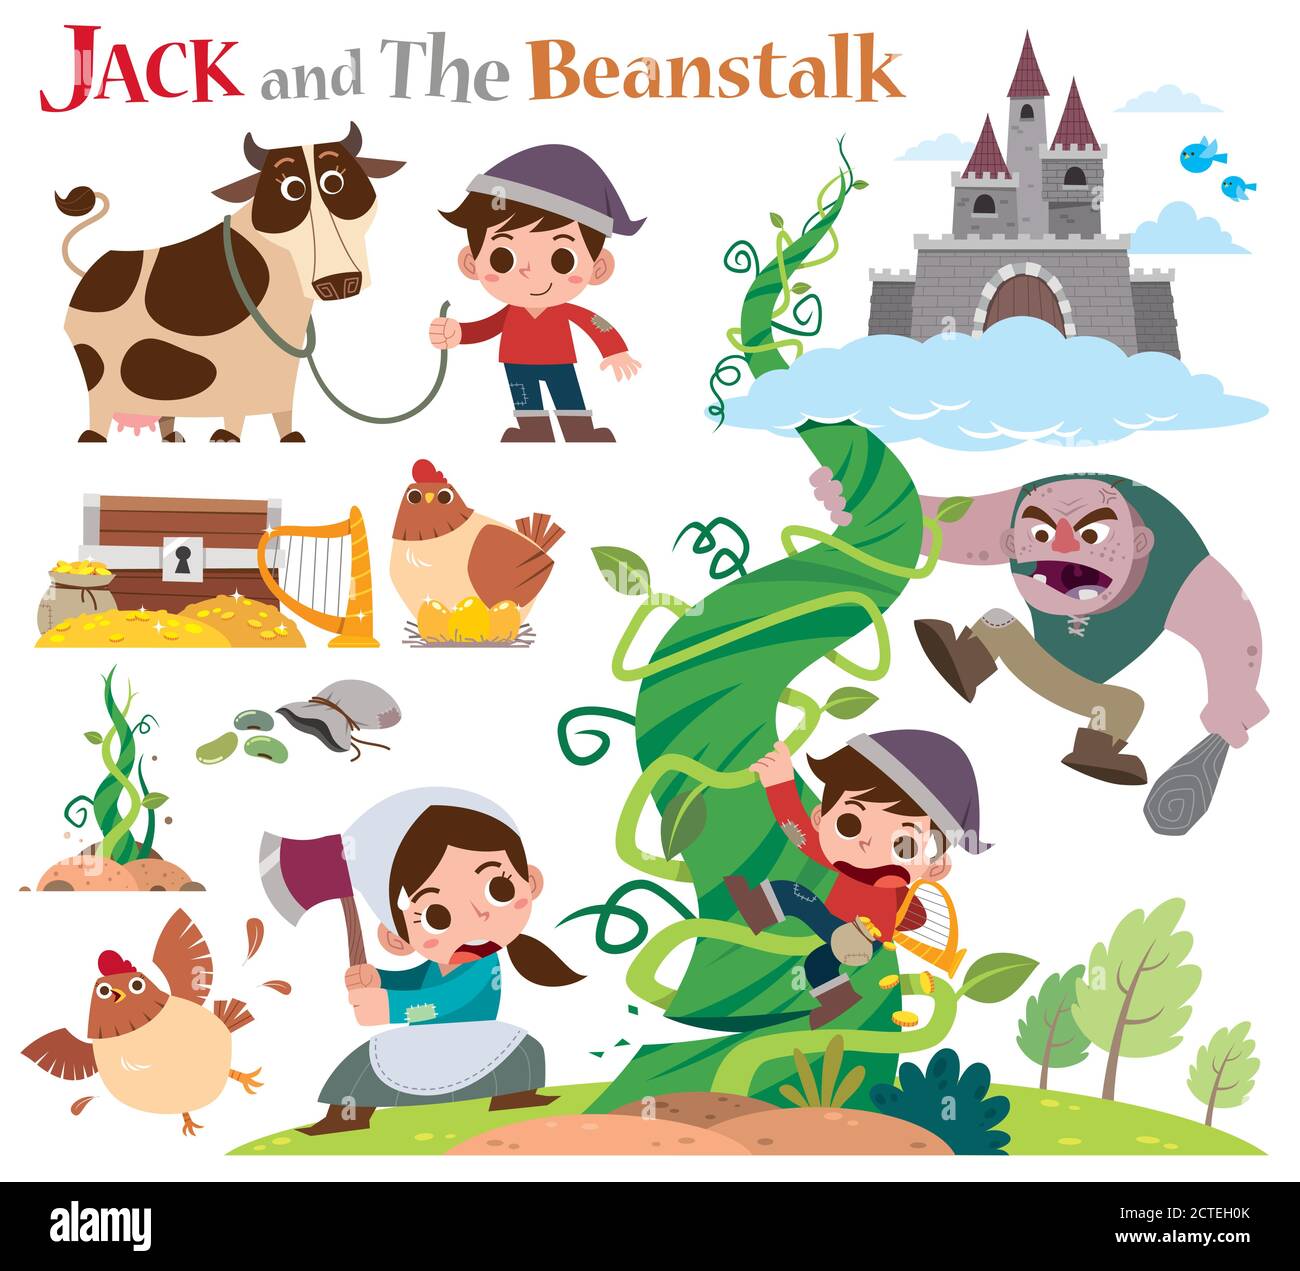 Jack and the Beanstalk - Clip Art, Line Drawings for Fairy Tale